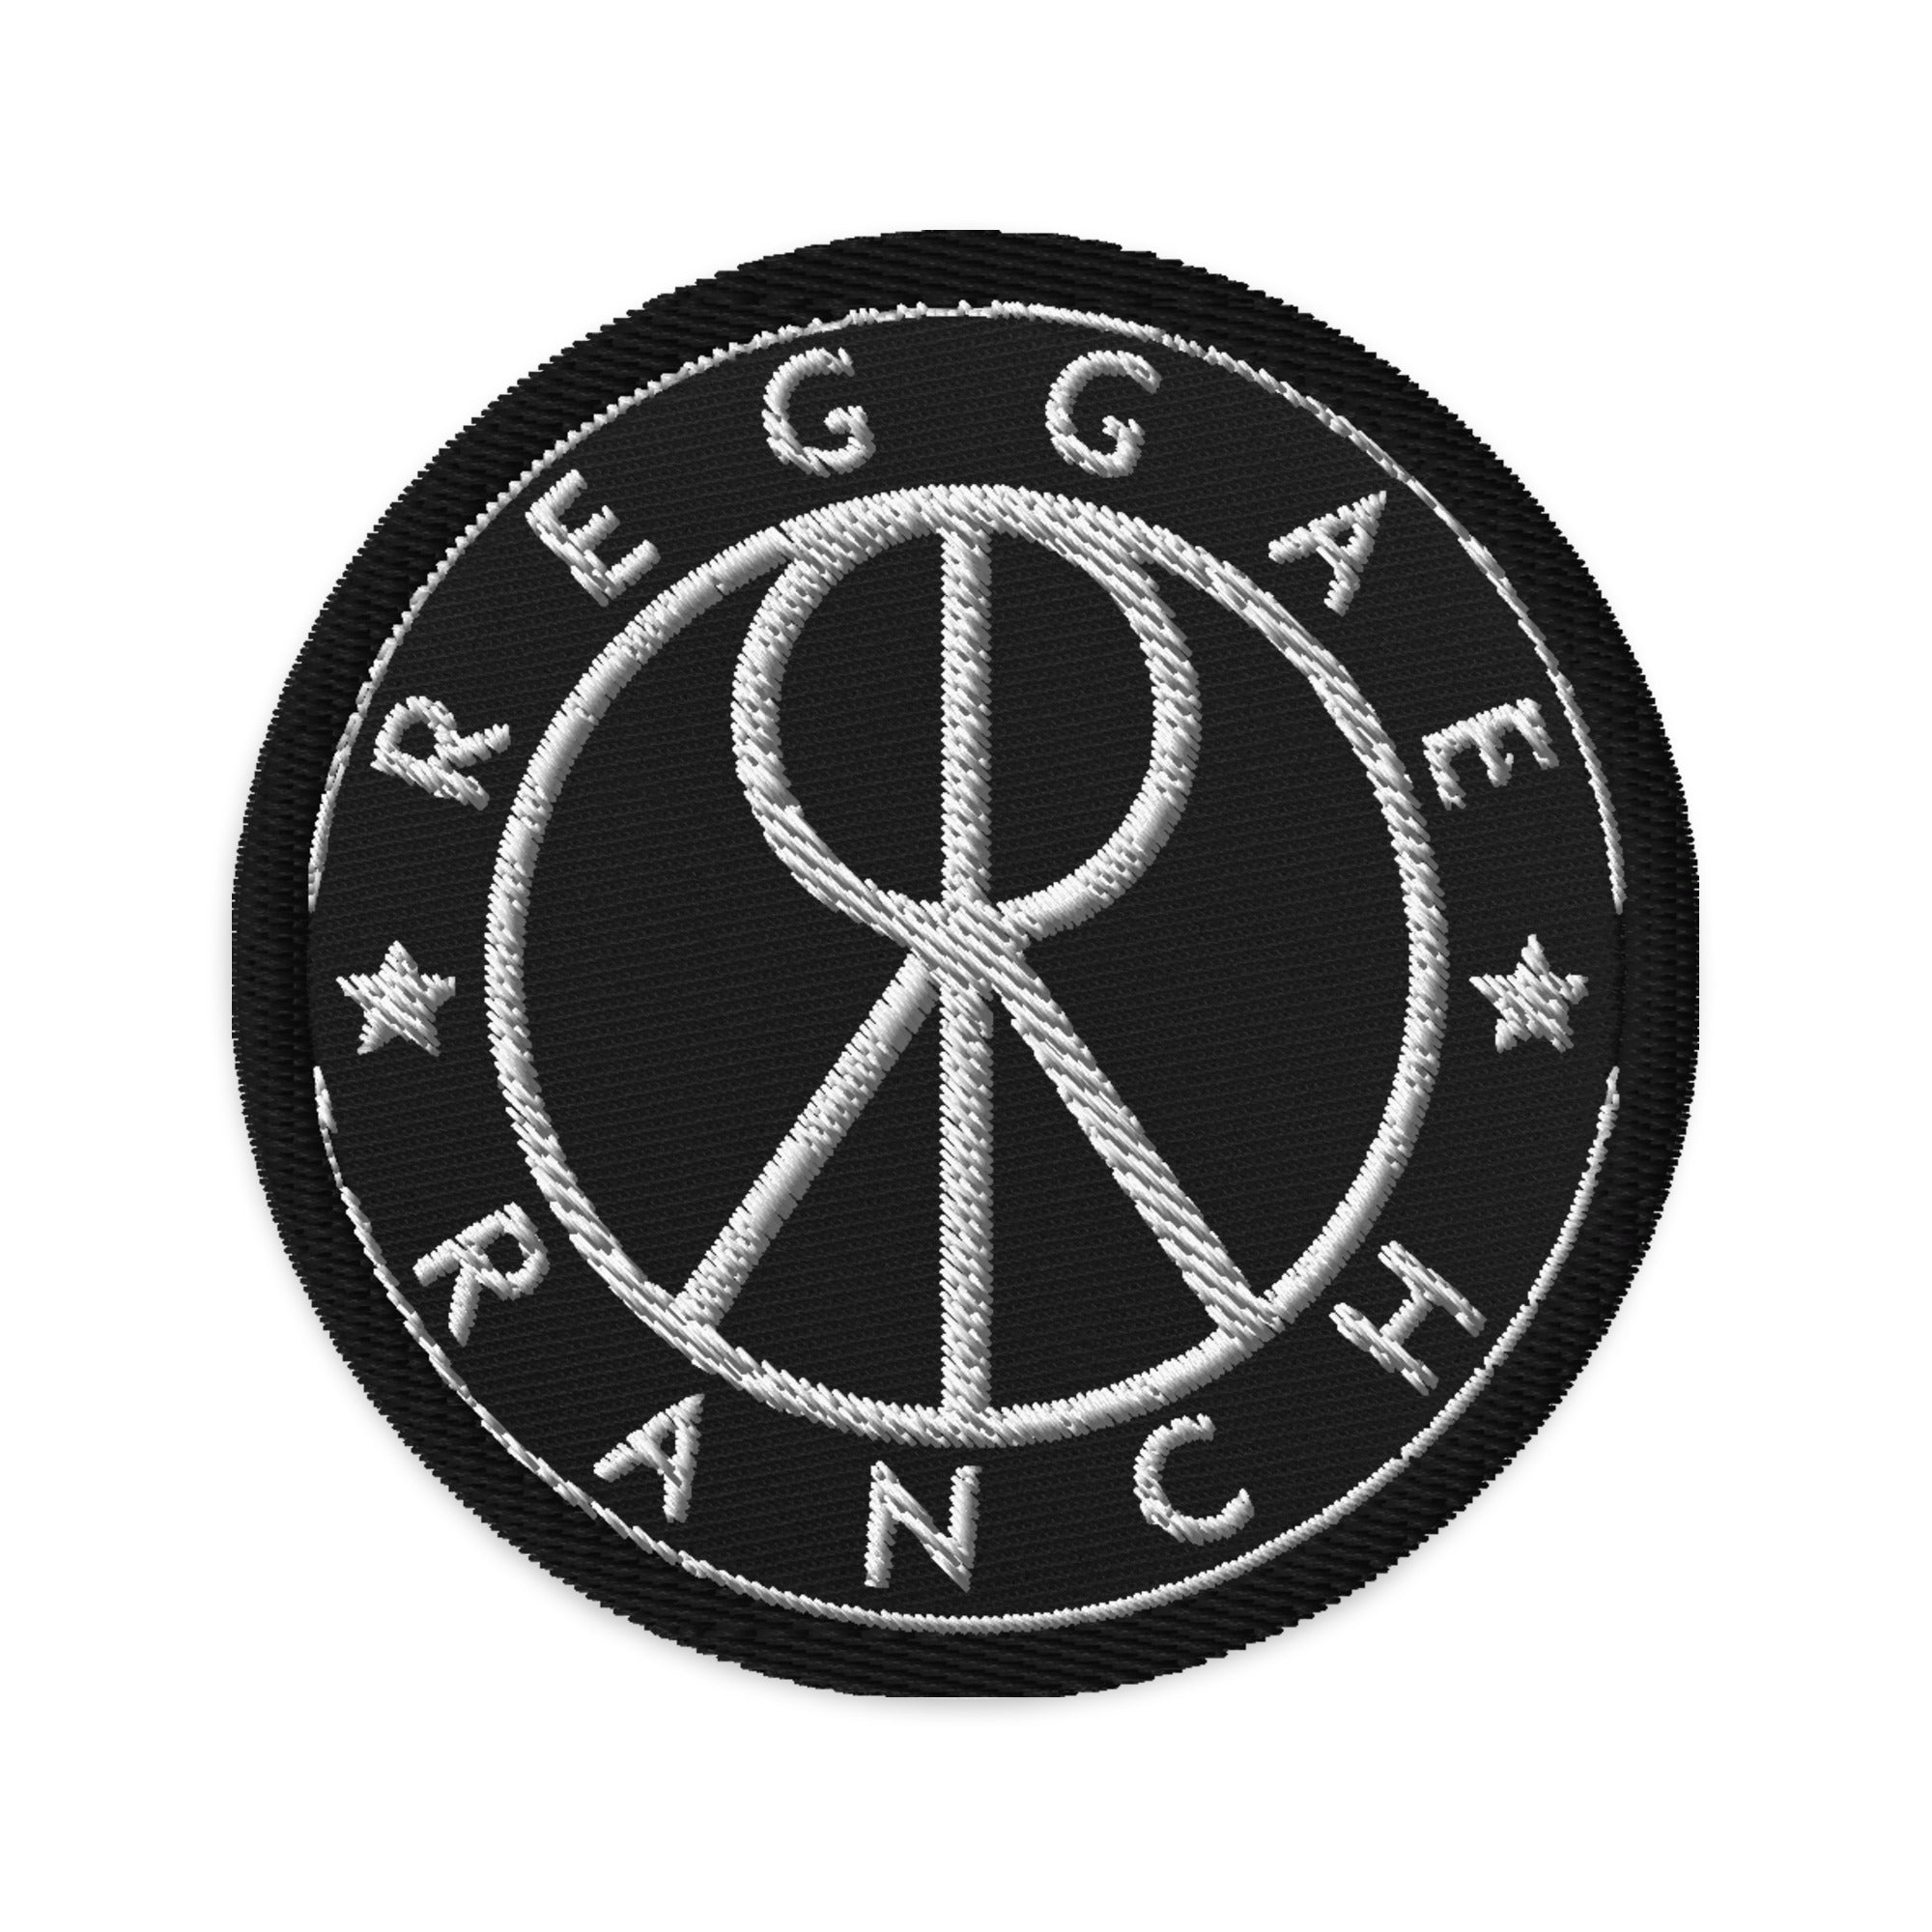 Reggae Ranch Embroidered Patch - Sun Drenched Vibes